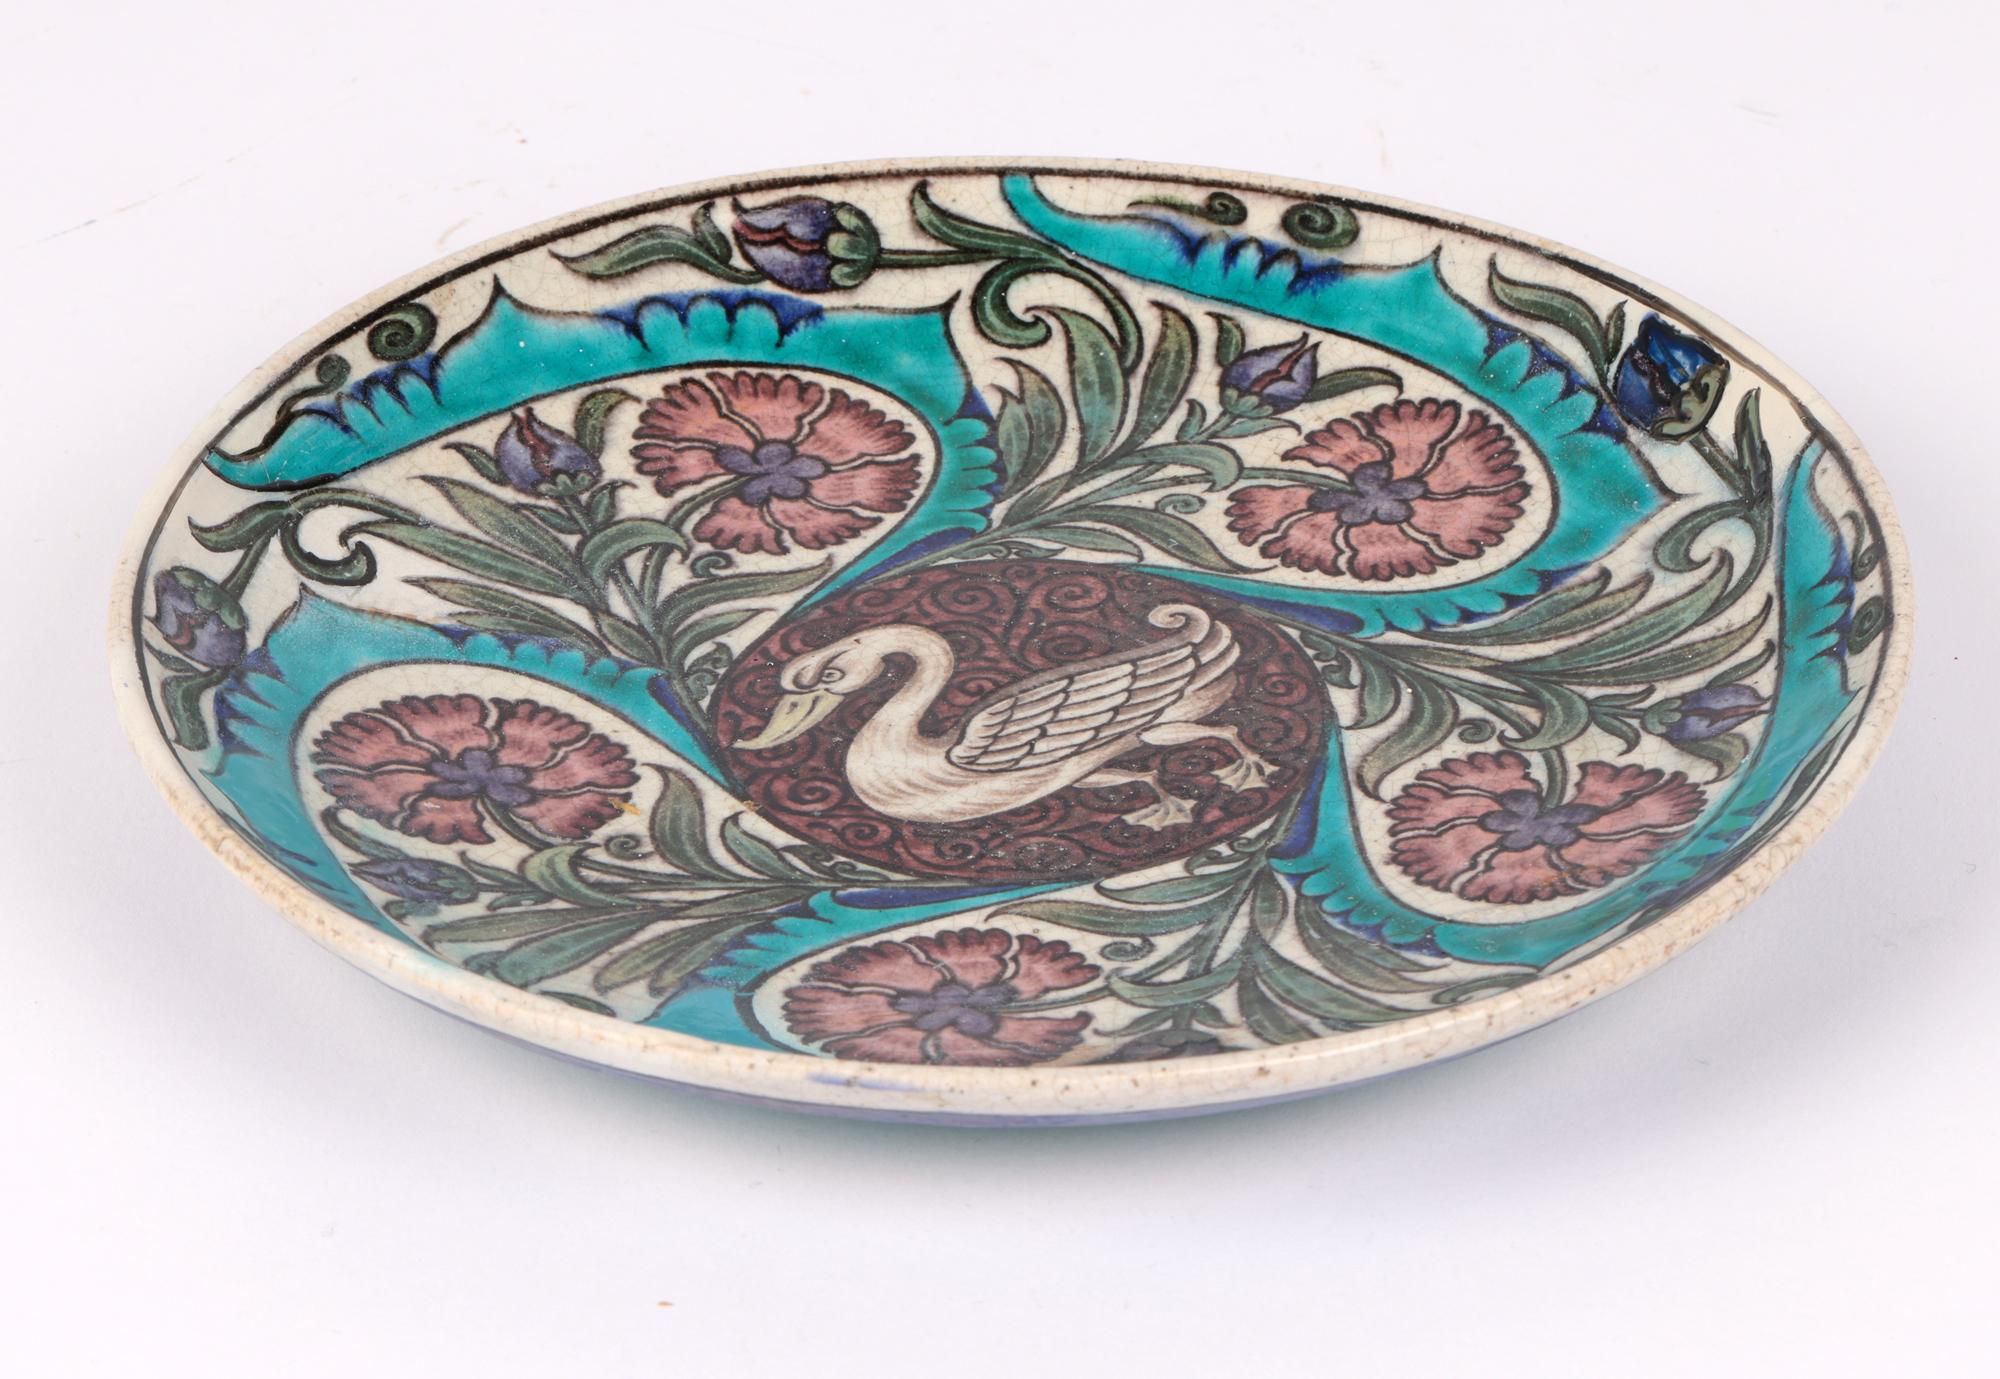 Late 19th Century Rare Arts & Crafts Earthenware Persian Style Dish Hand Painted with a Swan